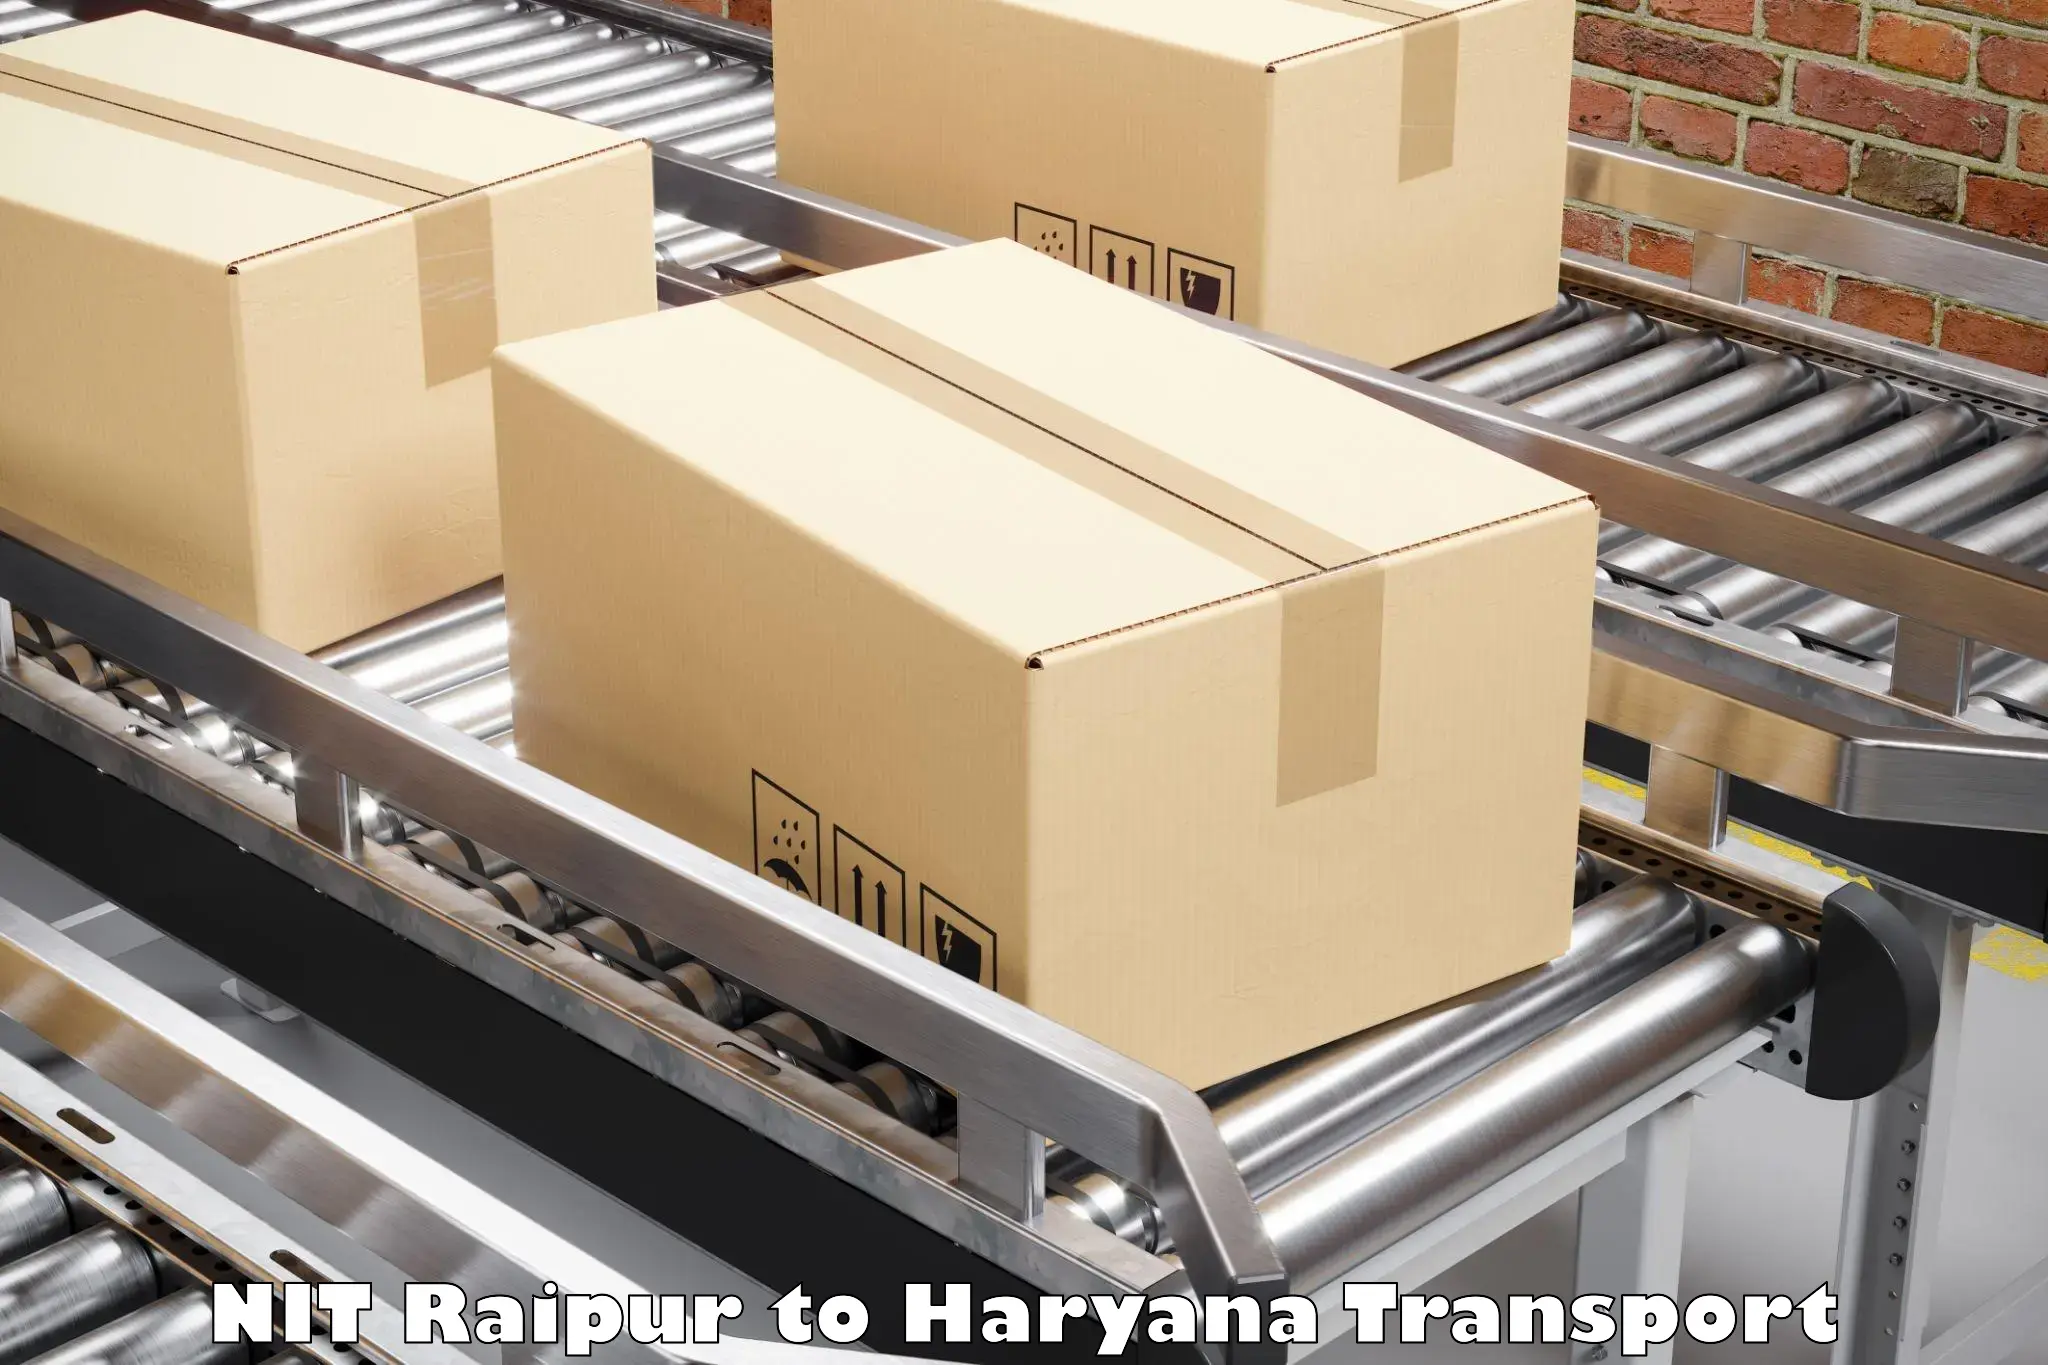 Container transport service NIT Raipur to Haryana